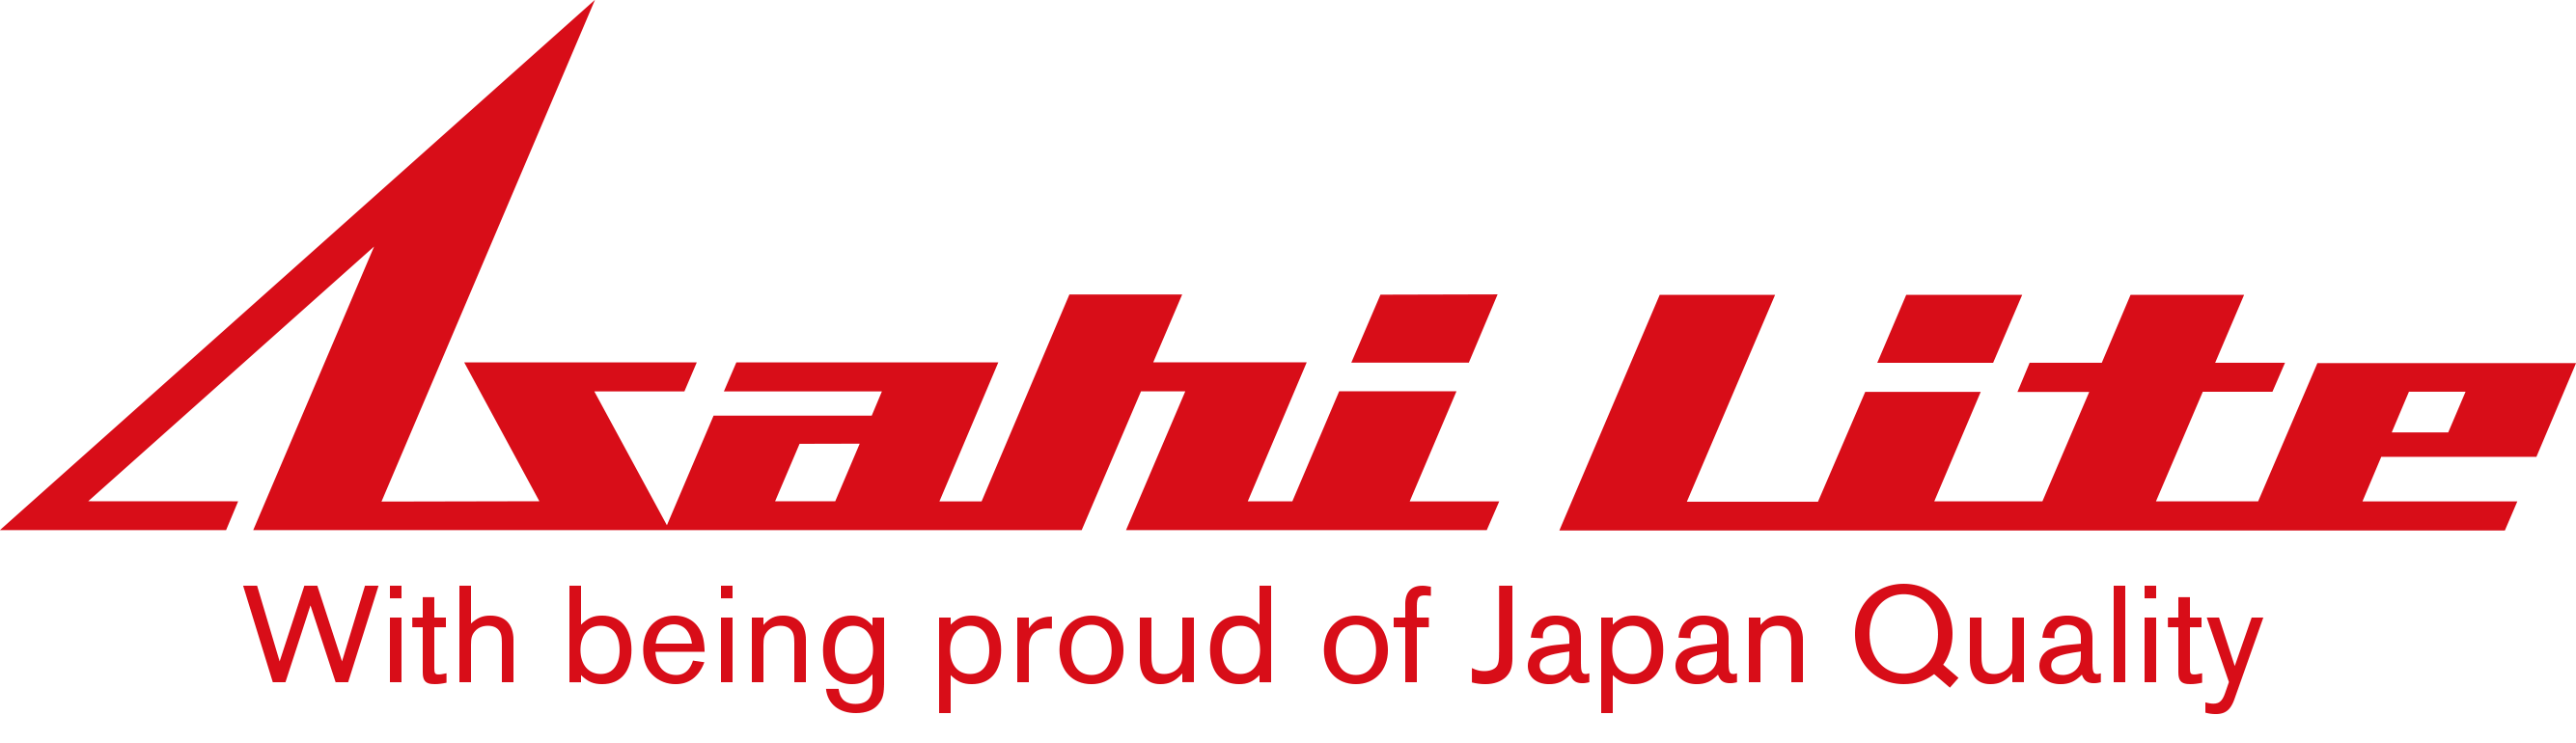 Asahi Lite - With being proud of Japan Quality